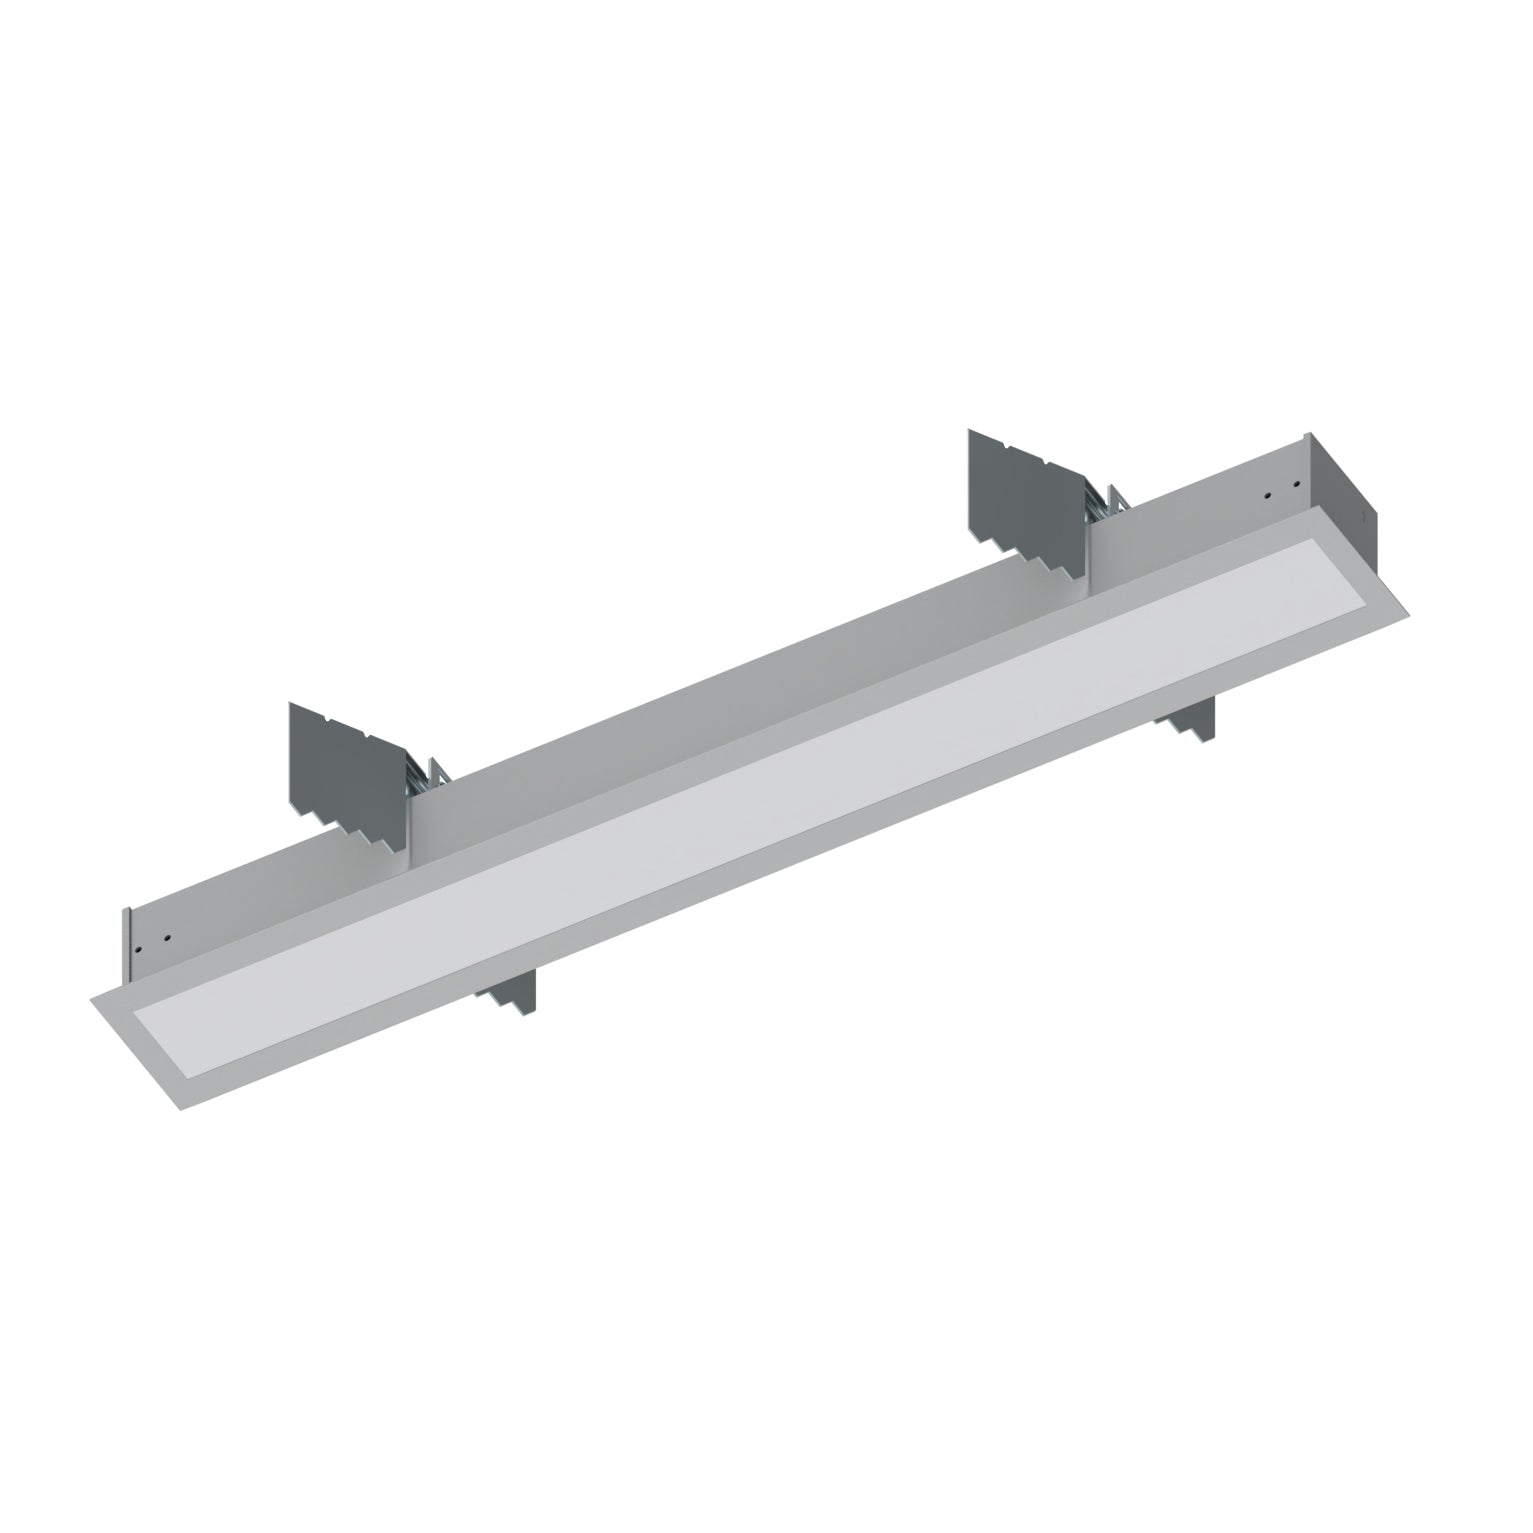 Nora Lighting NRLIN-21030A - Linear - 2' L-Line LED Recessed Linear, 2100lm / 3000K, Aluminum Finish